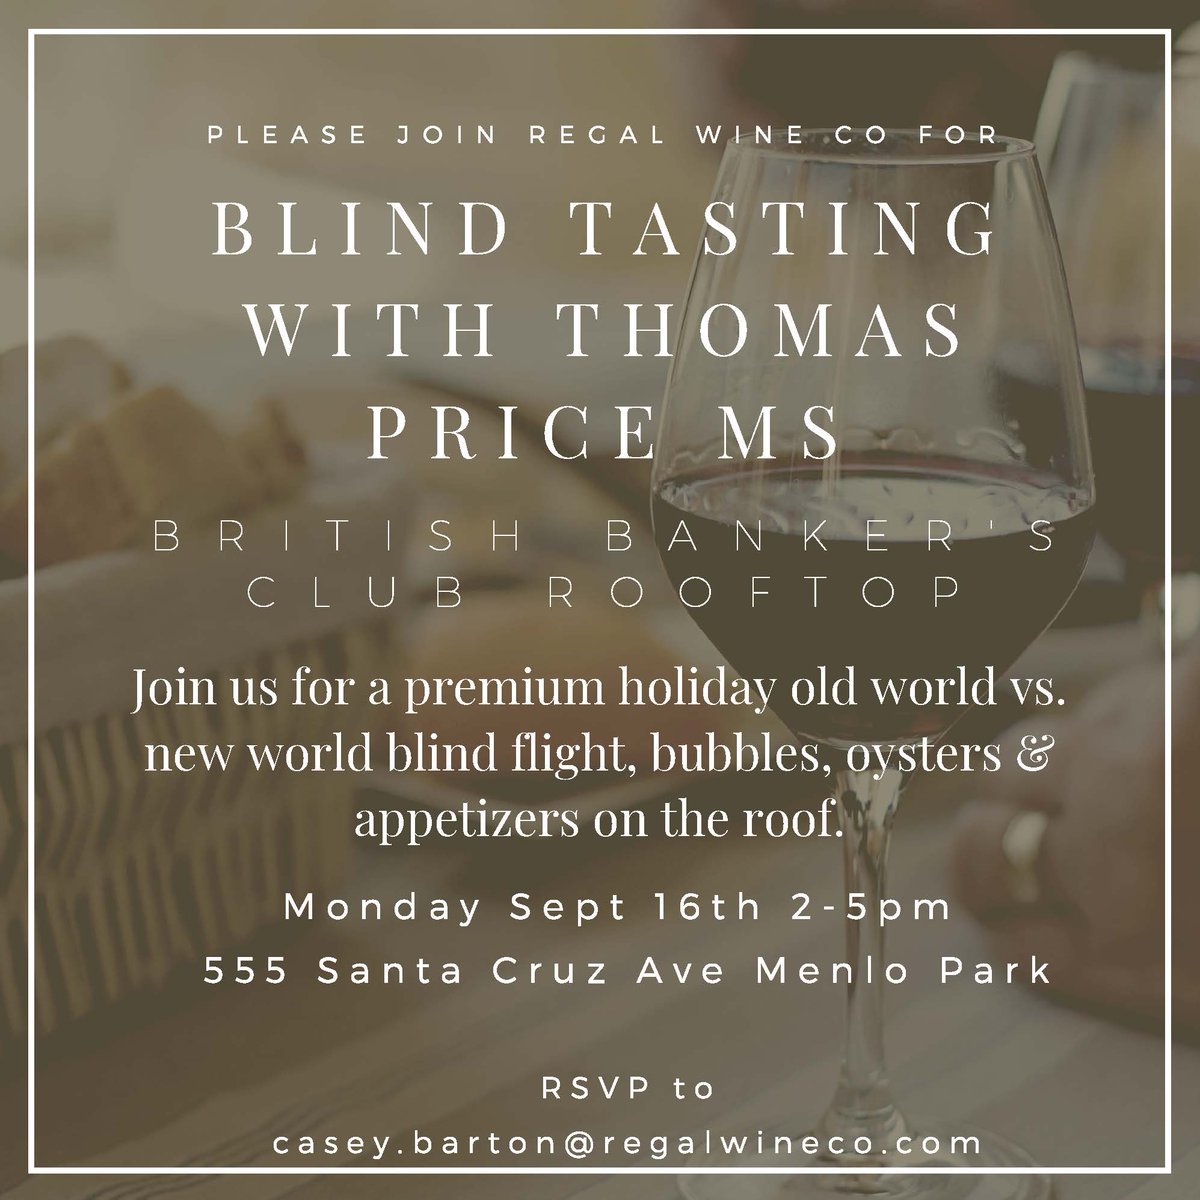 RWC is doing a new world vs.old world blind tasting with MS Thomas Price! Come take this opportunity to talk to Thomas, taste some wine, and enjoy yummy food on the rooftop!

Monday, September 16th
British Banker’s Club in Menlo Park

RSVP to Casey.Barton@regalwineco.com